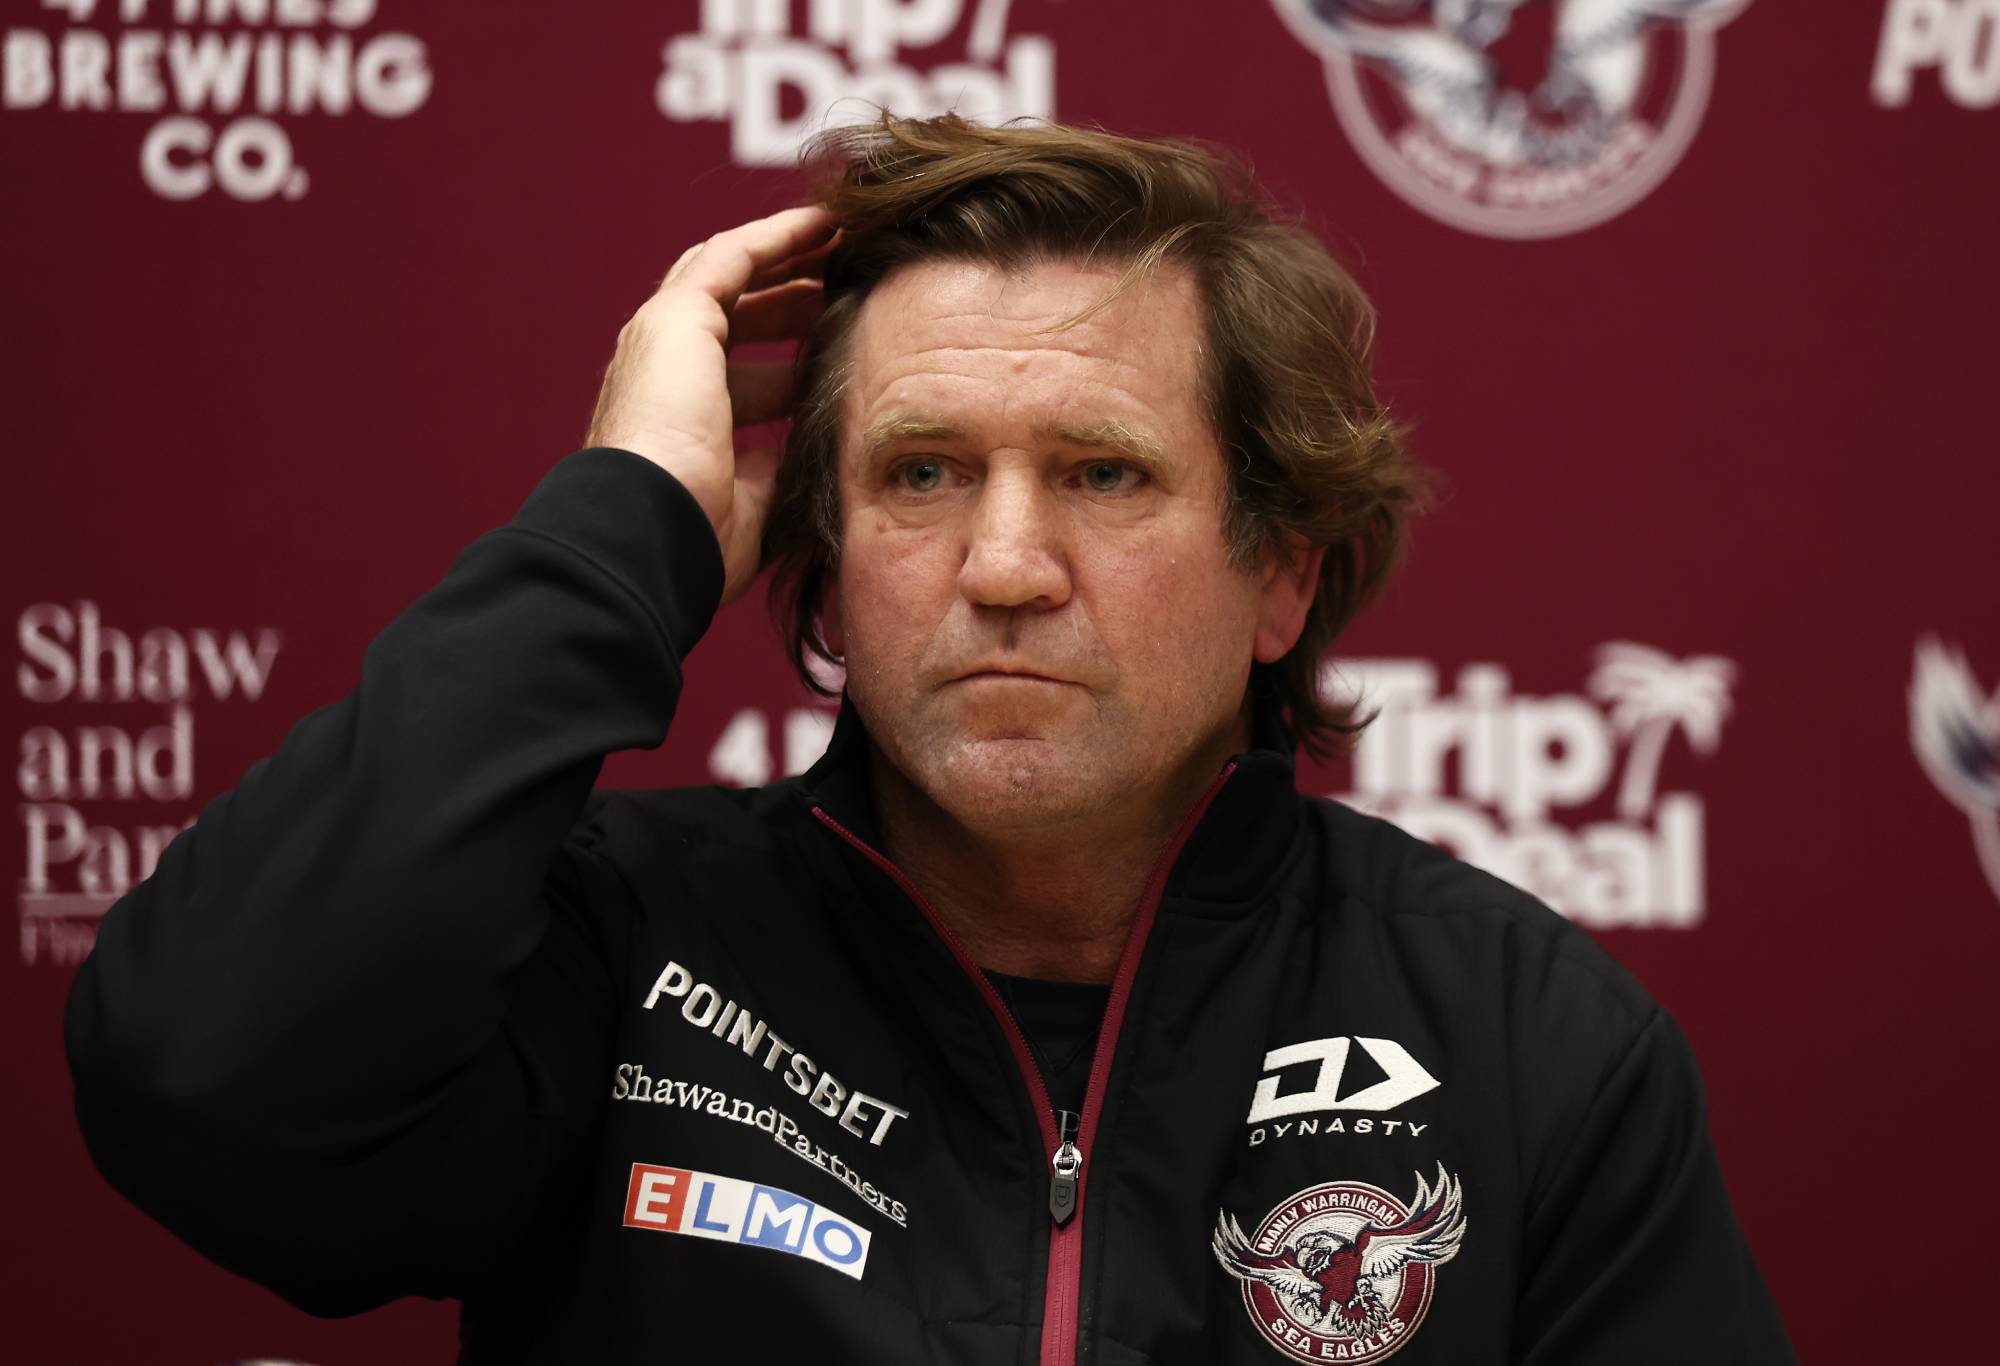 SYDNEY, AUSTRALIA - JULY 26: Sea Eagles coach Des Hasler speaks to the media during a Manly Warringah Sea Eagles NRL media opportunity at 4 Pines Park on July 26, 2022 in Sydney, Australia. (Photo by Matt King/Getty Images)